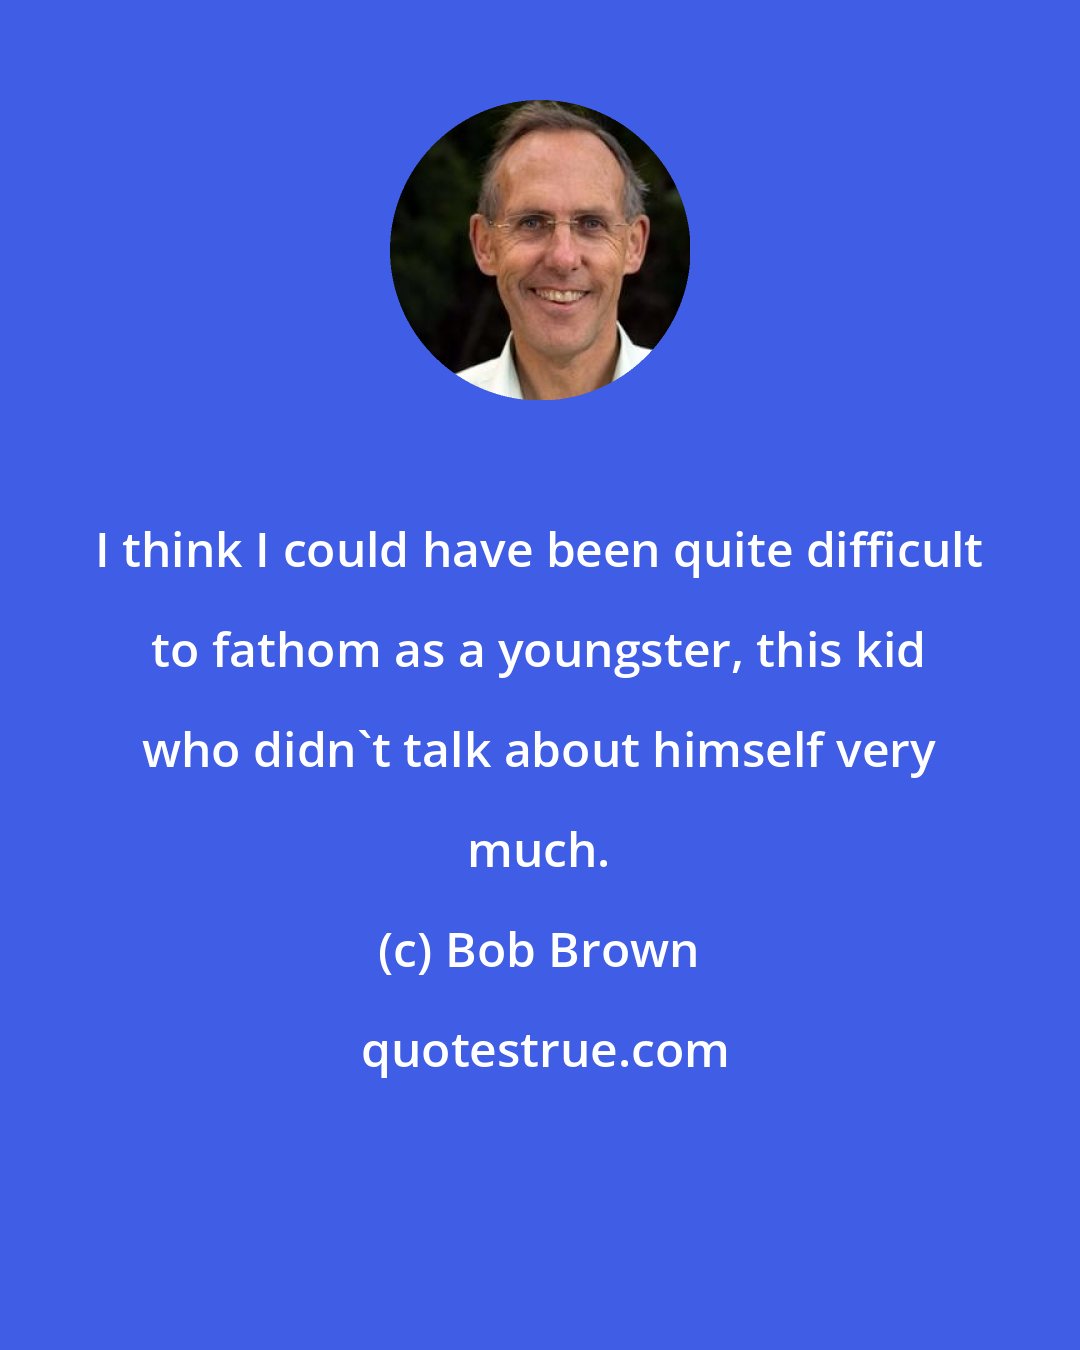 Bob Brown: I think I could have been quite difficult to fathom as a youngster, this kid who didn't talk about himself very much.